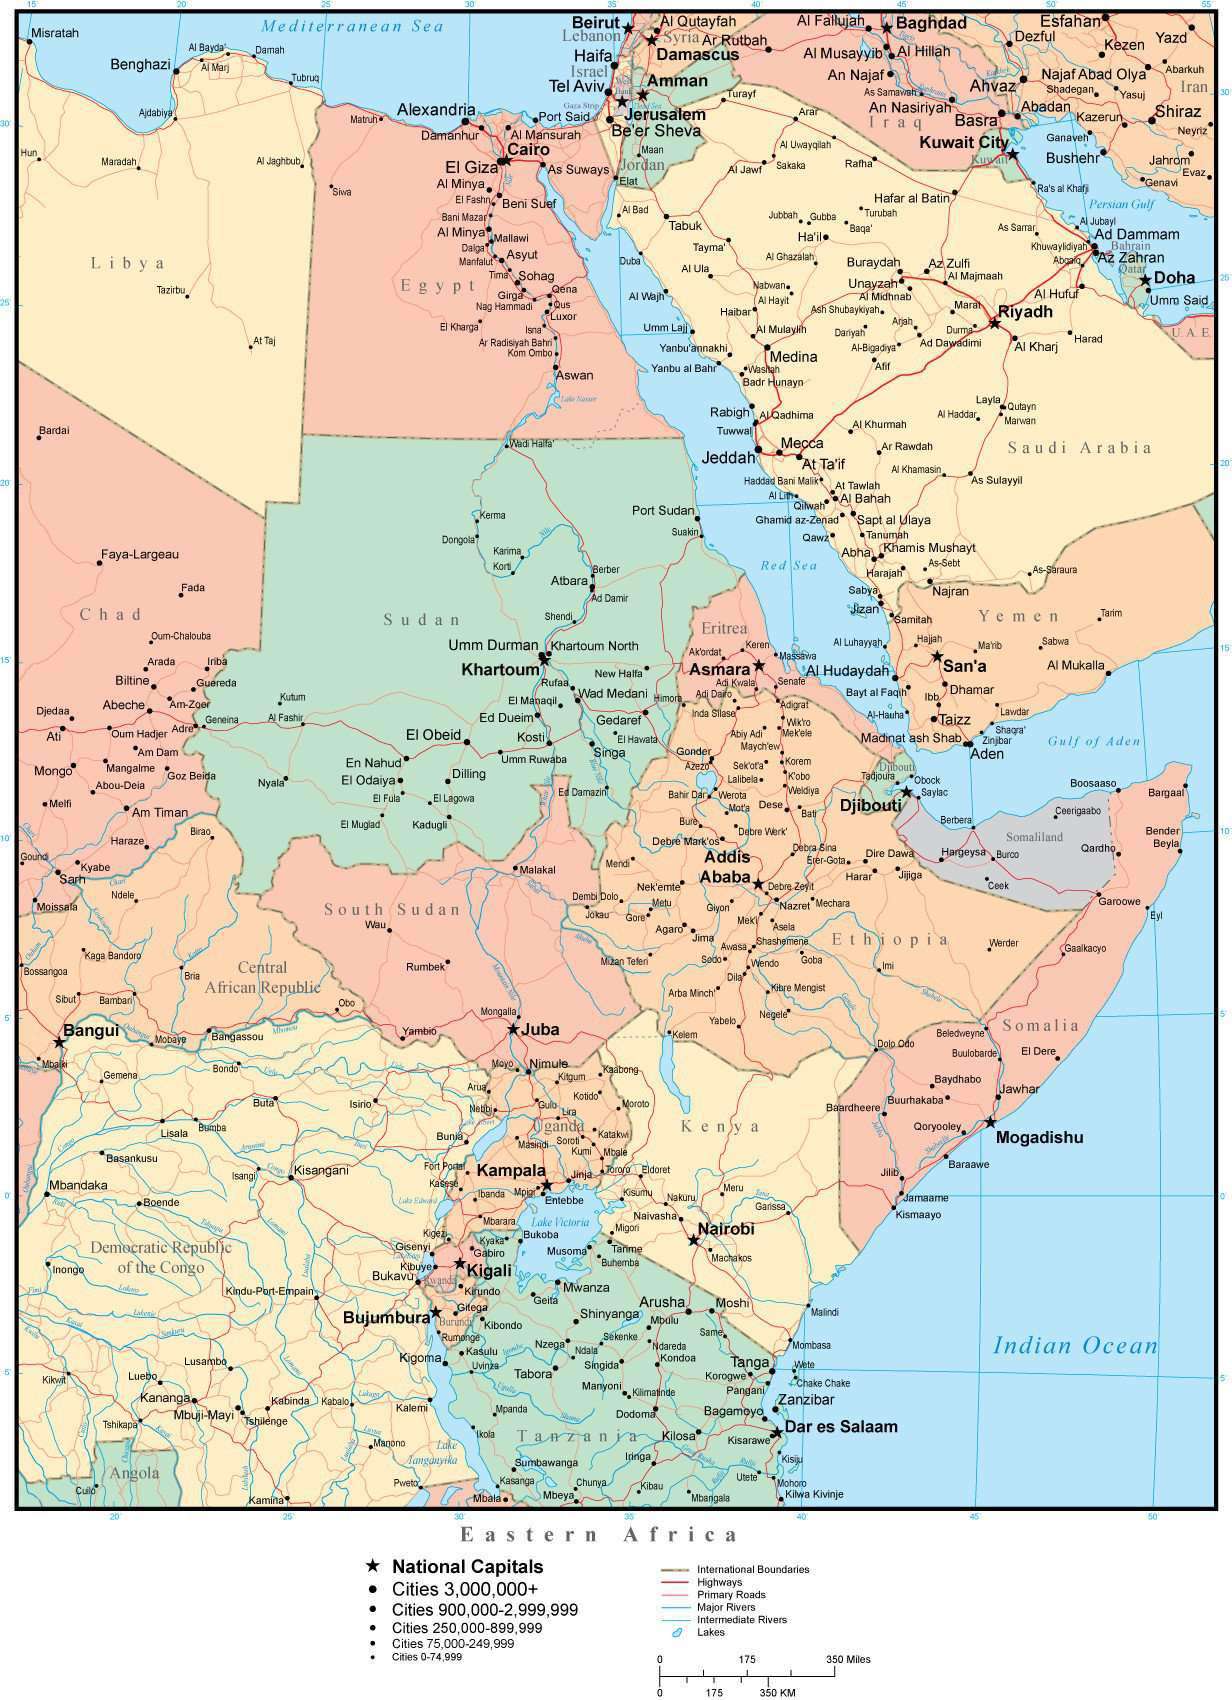 Eastern Africa Map With Countries, Capitals, Cities, Roads And Water